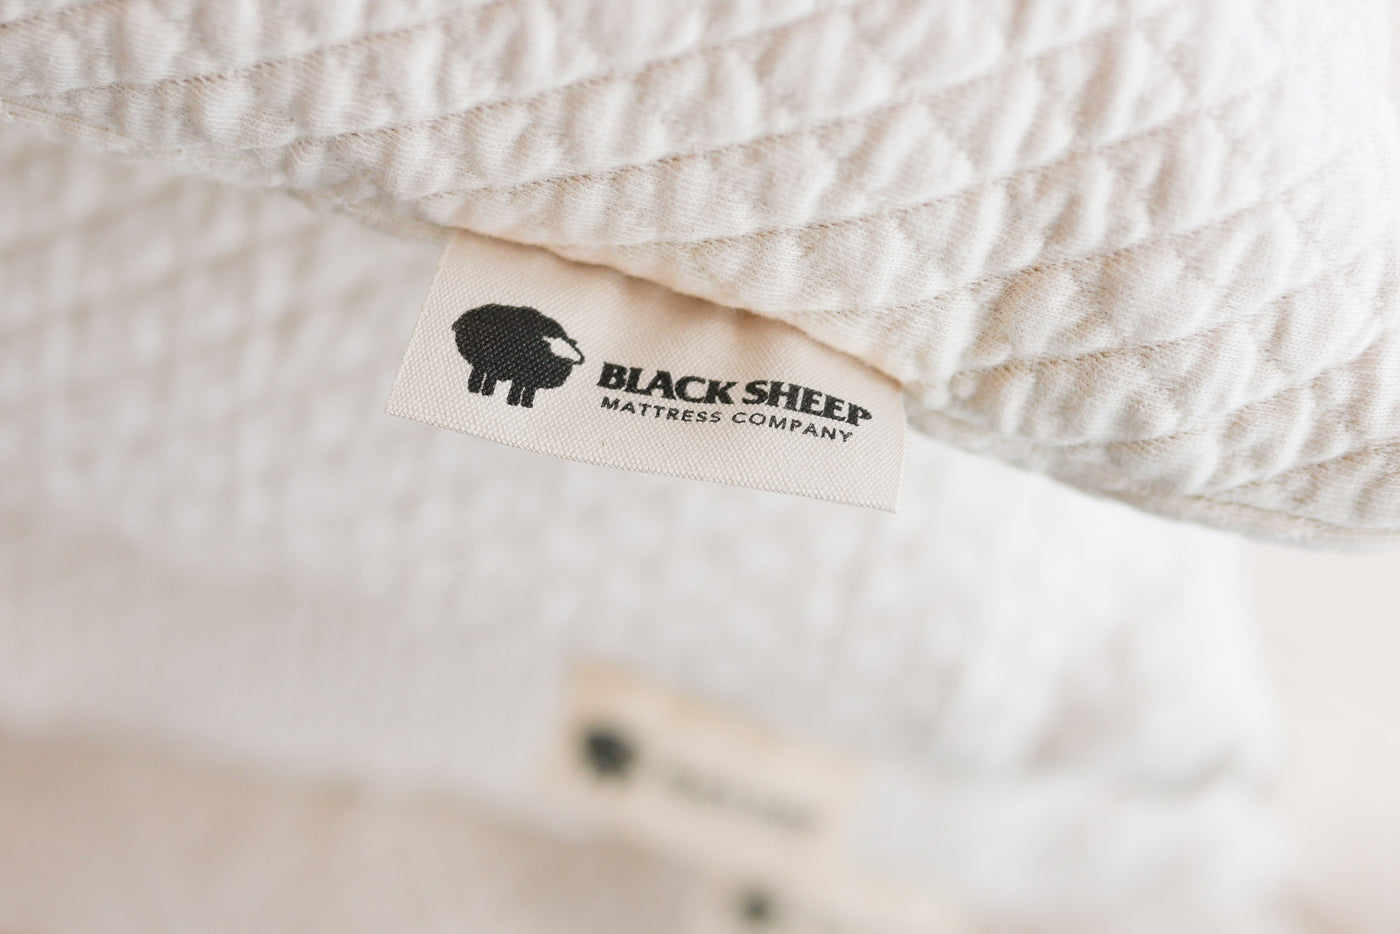 Close up of Black Sheep Mattress label on a 100% natural talalay latex pillows in organic cotton case